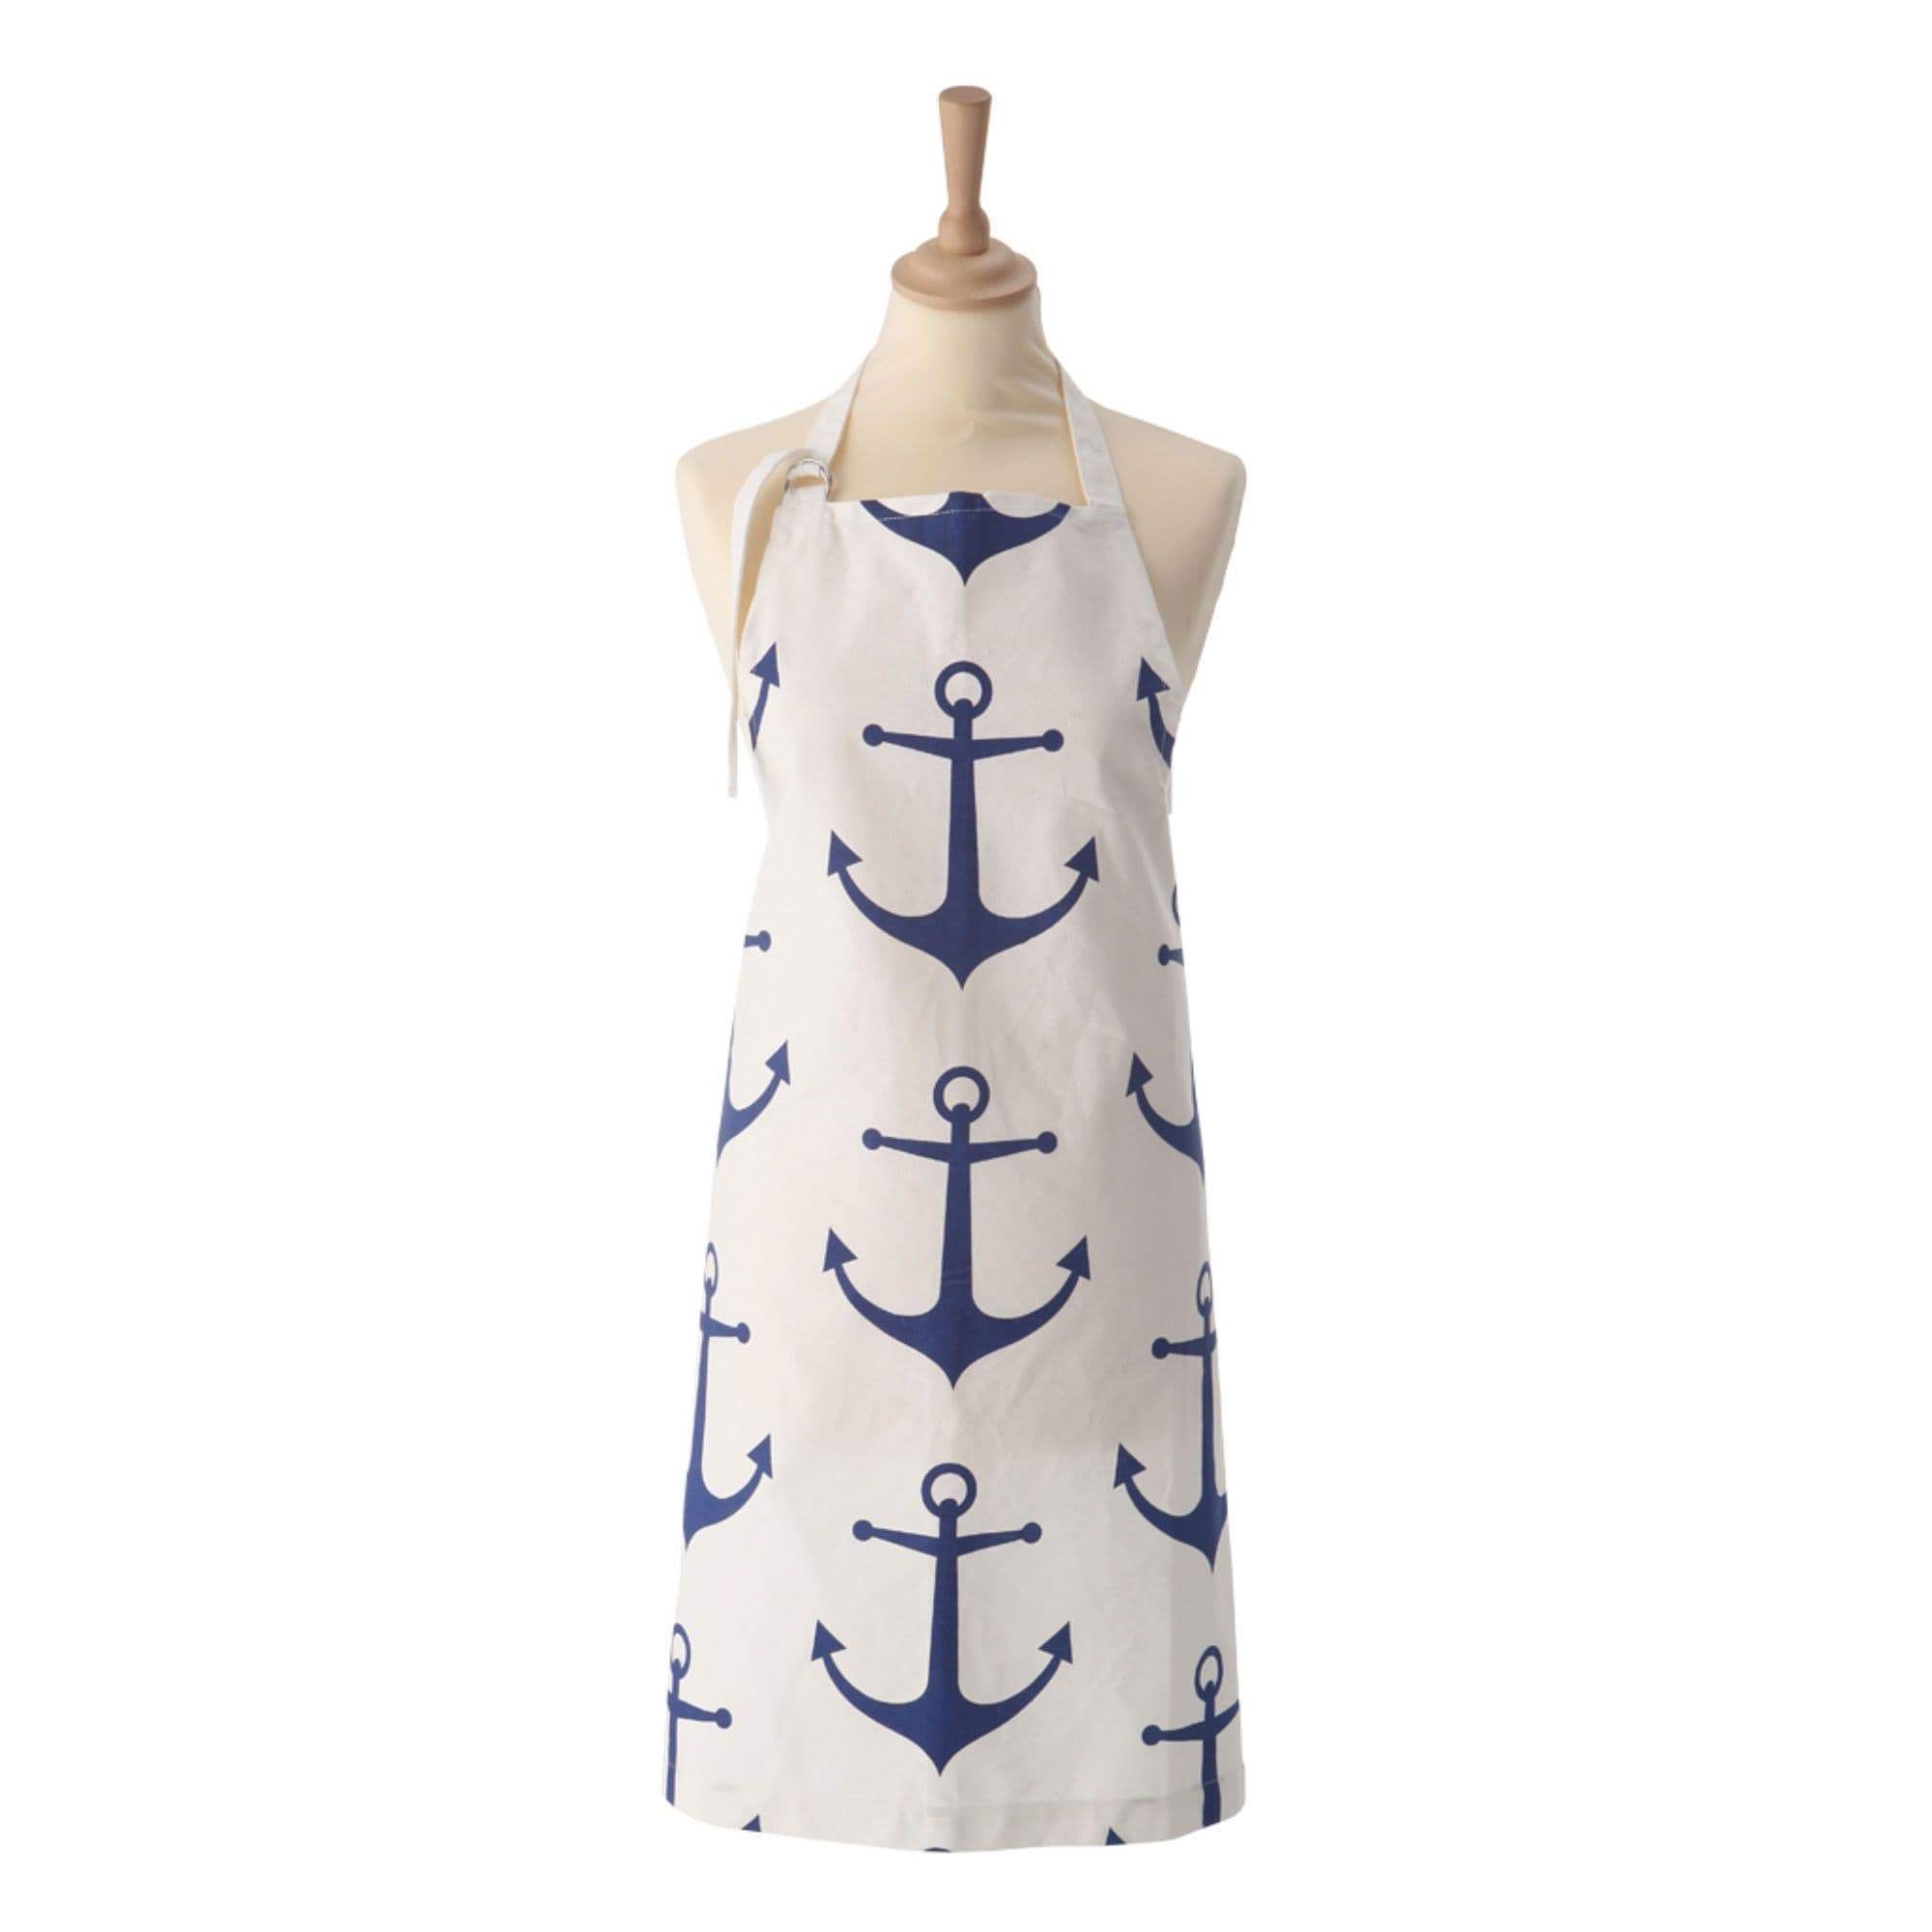 Apron – Blue And White Anchor